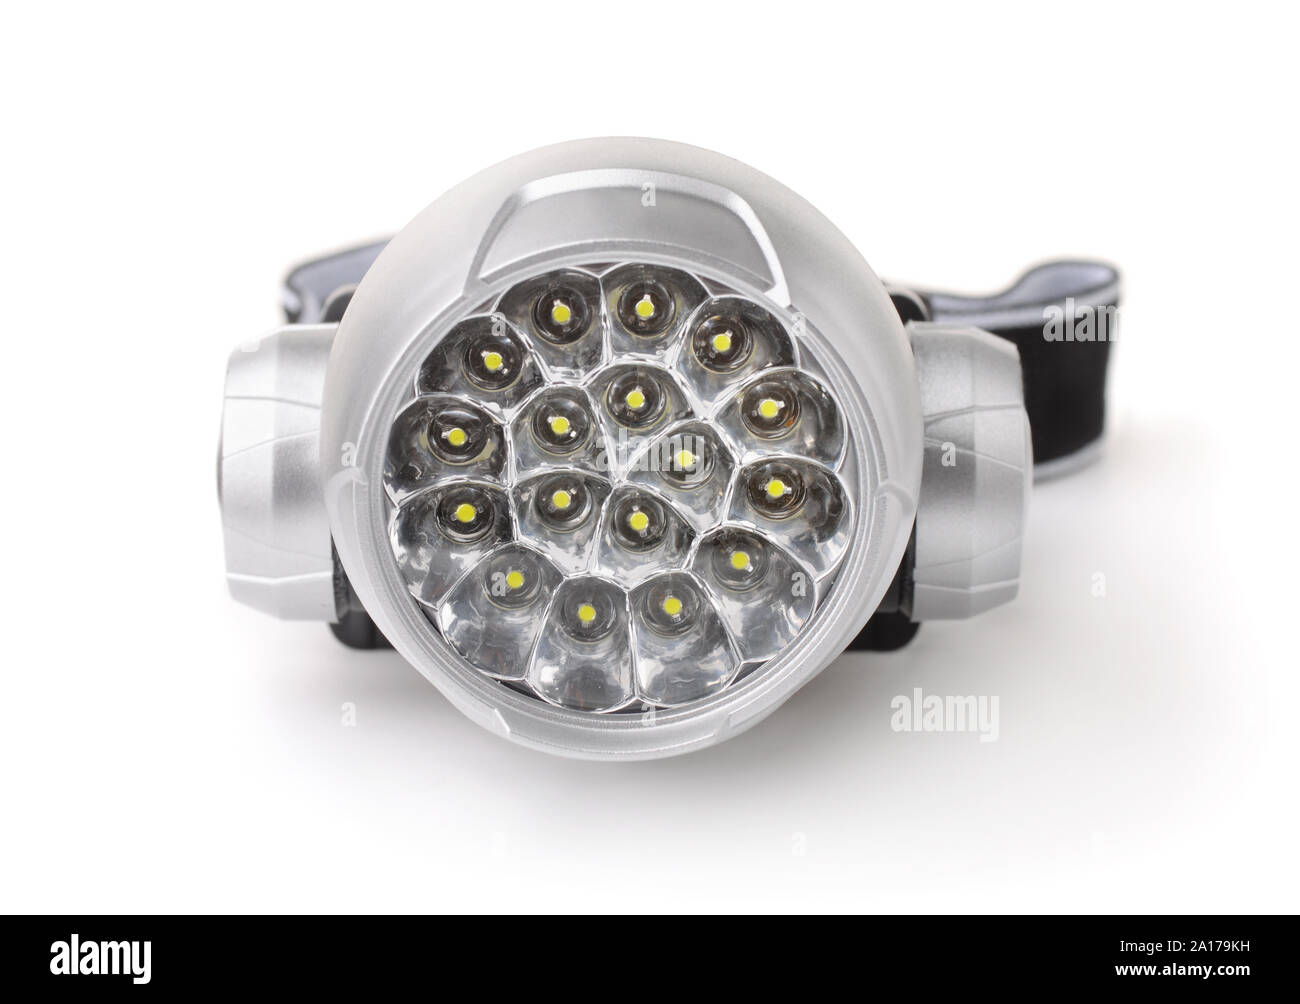 Front view of LED headlamp isolated on white Stock Photo